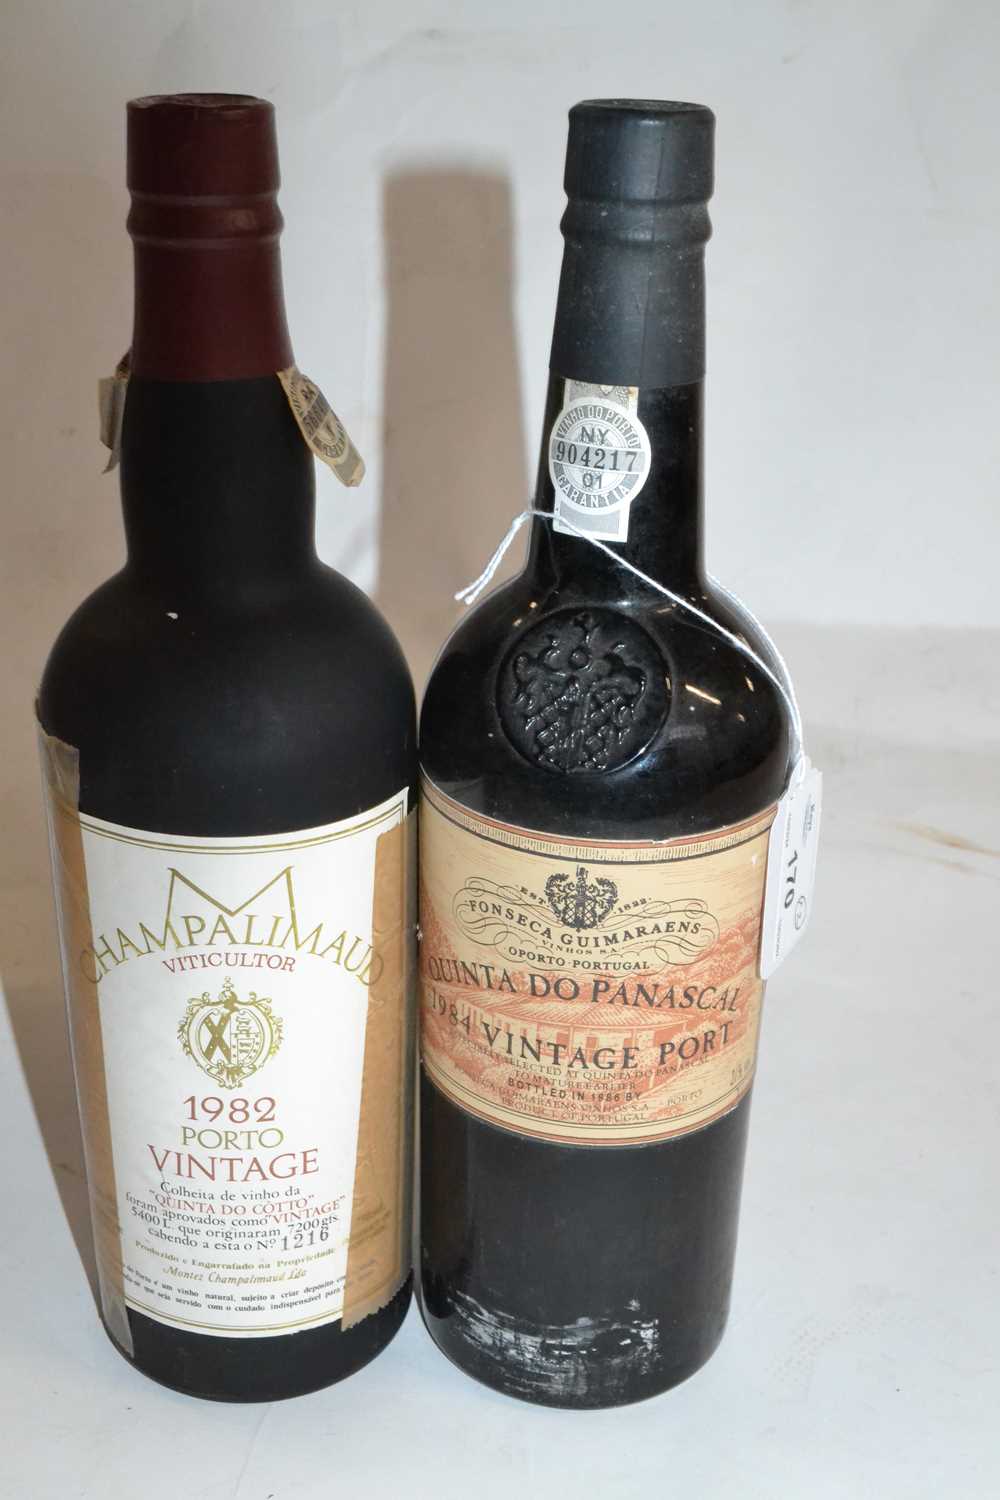 Two bottles of port to include one bottle of Champalimaud 1982 Porto Vintage and one bottle of